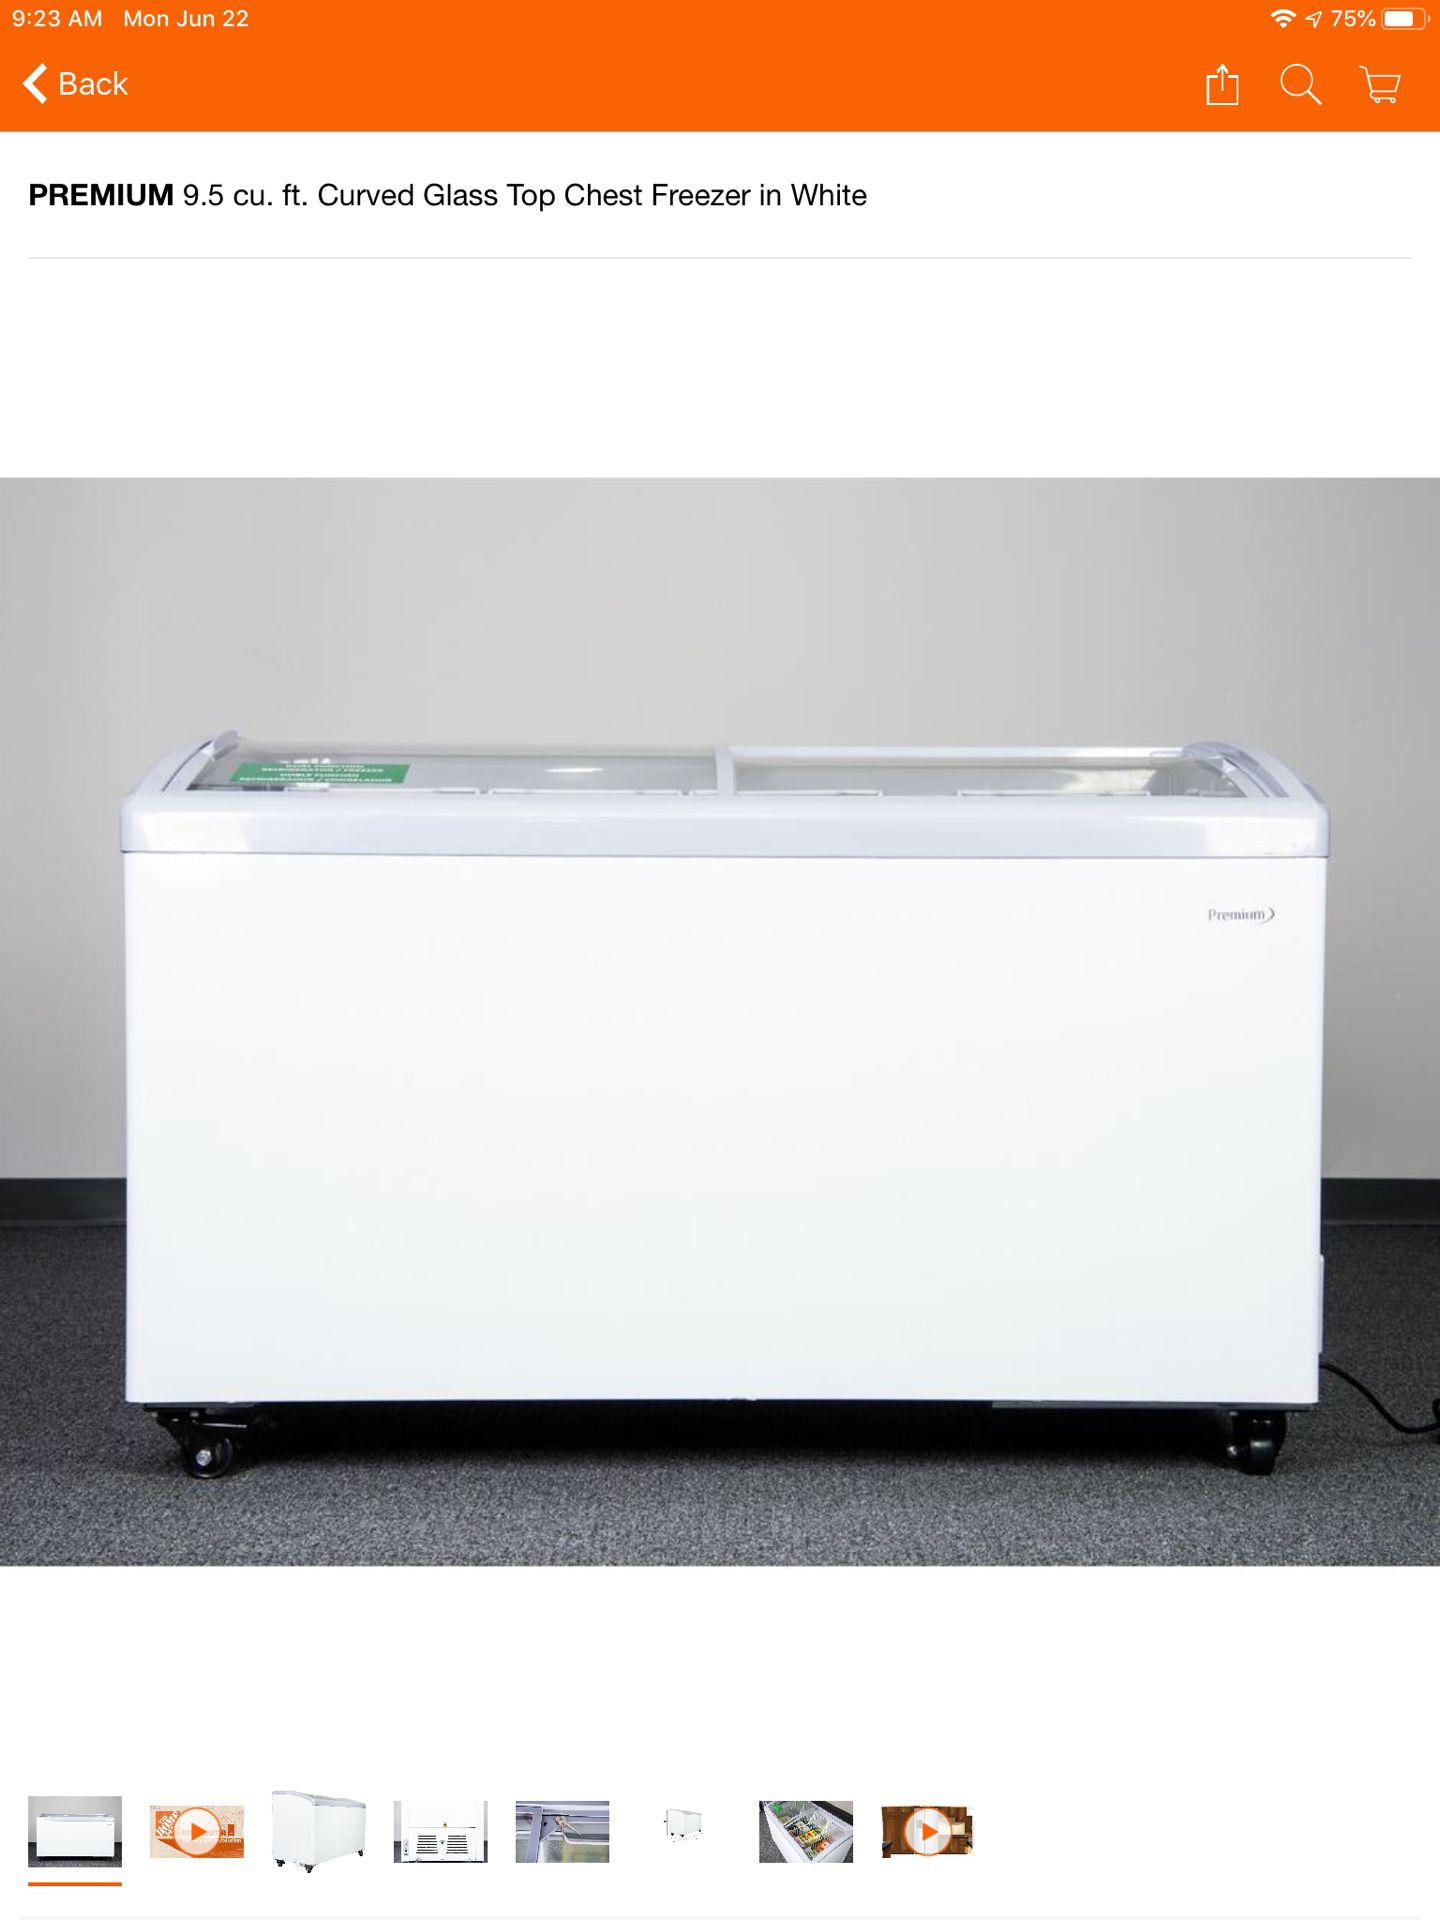 PREMIUM 9.5 cu. ft. Curved Glass Top Chest Freezer in White